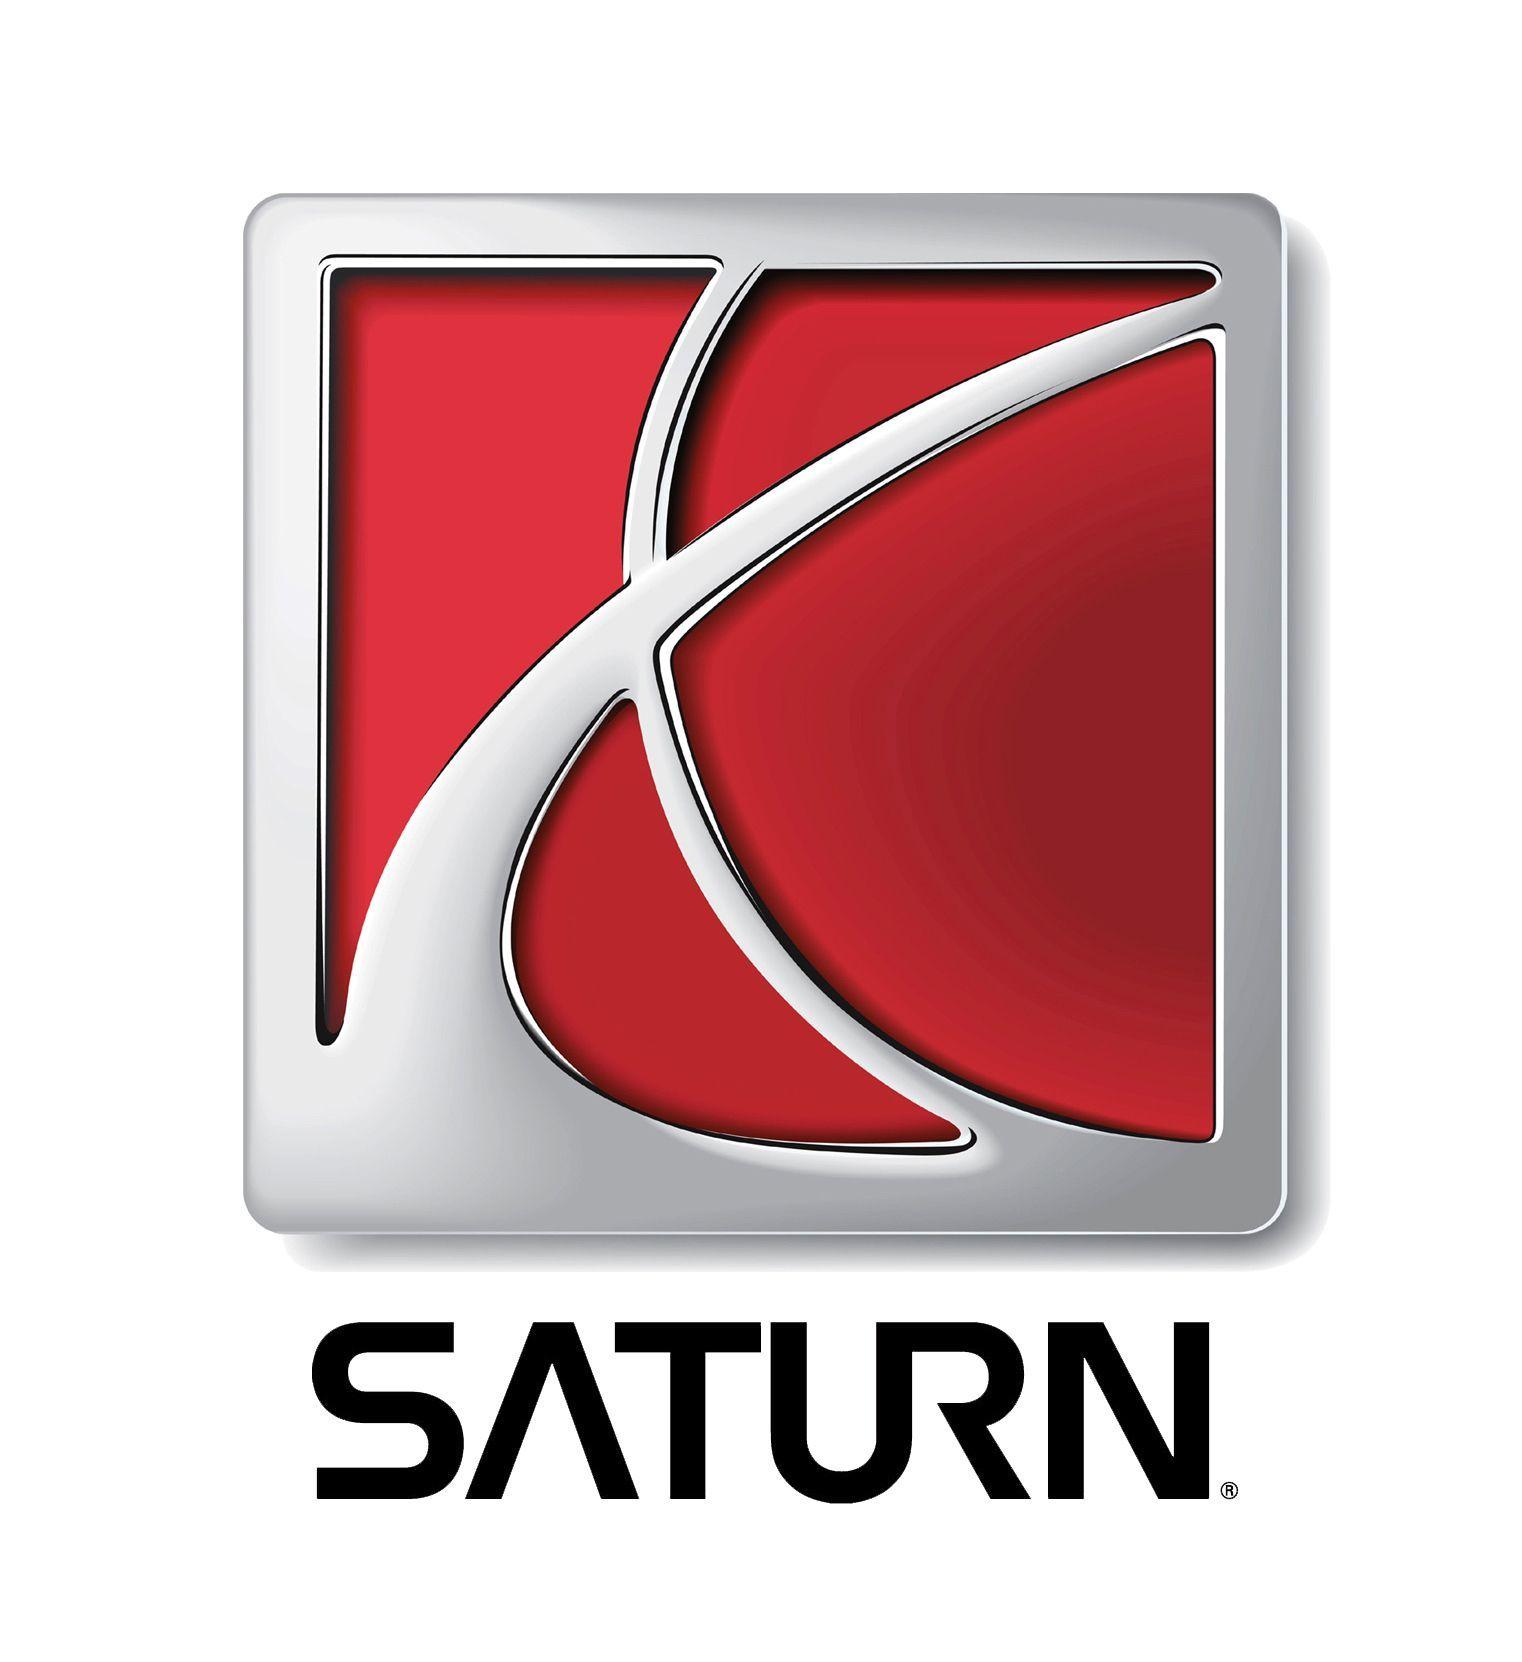 Cool Car Company Logo - Saturn the car company alludes to the Roman name for Kronos